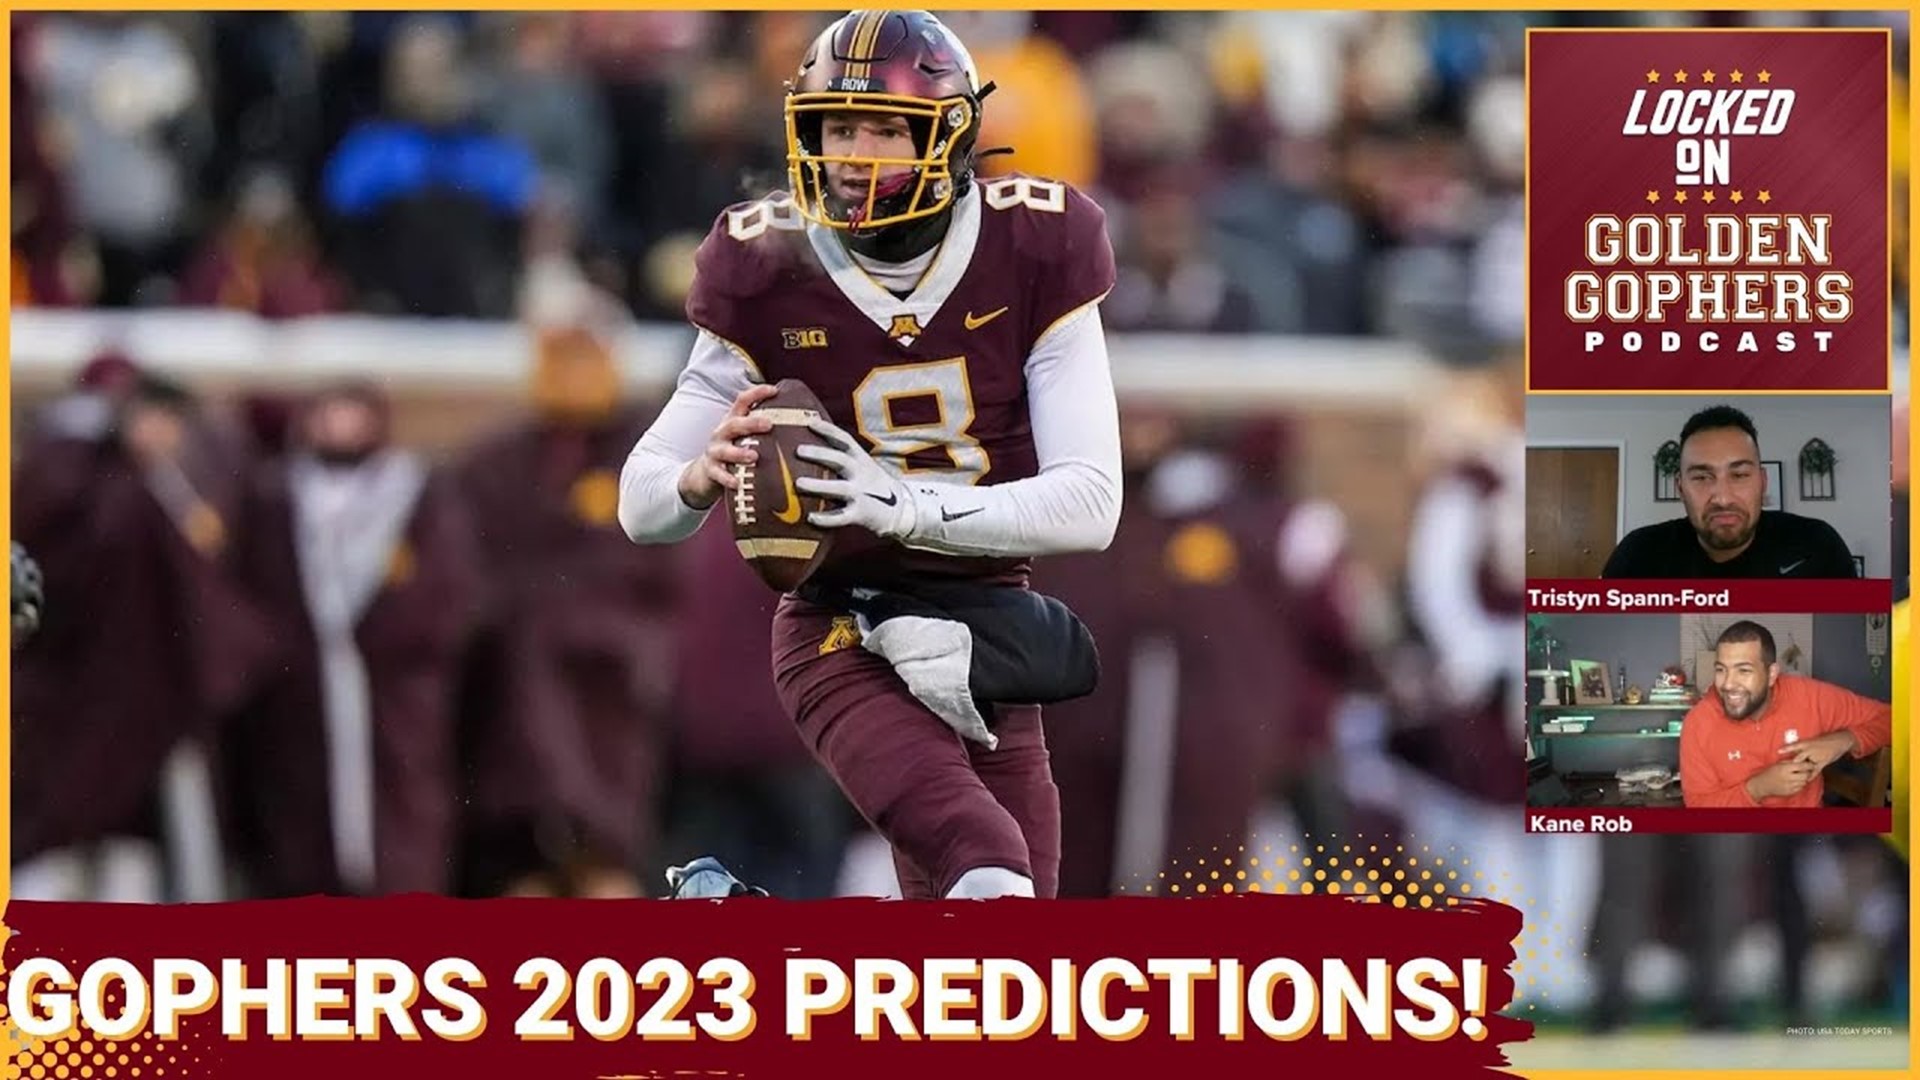 Today we are joined on Locked On Golden Gophers by our weekly co-host Tristyn Spann-Ford to talk questions for the season, over/unders in 2023